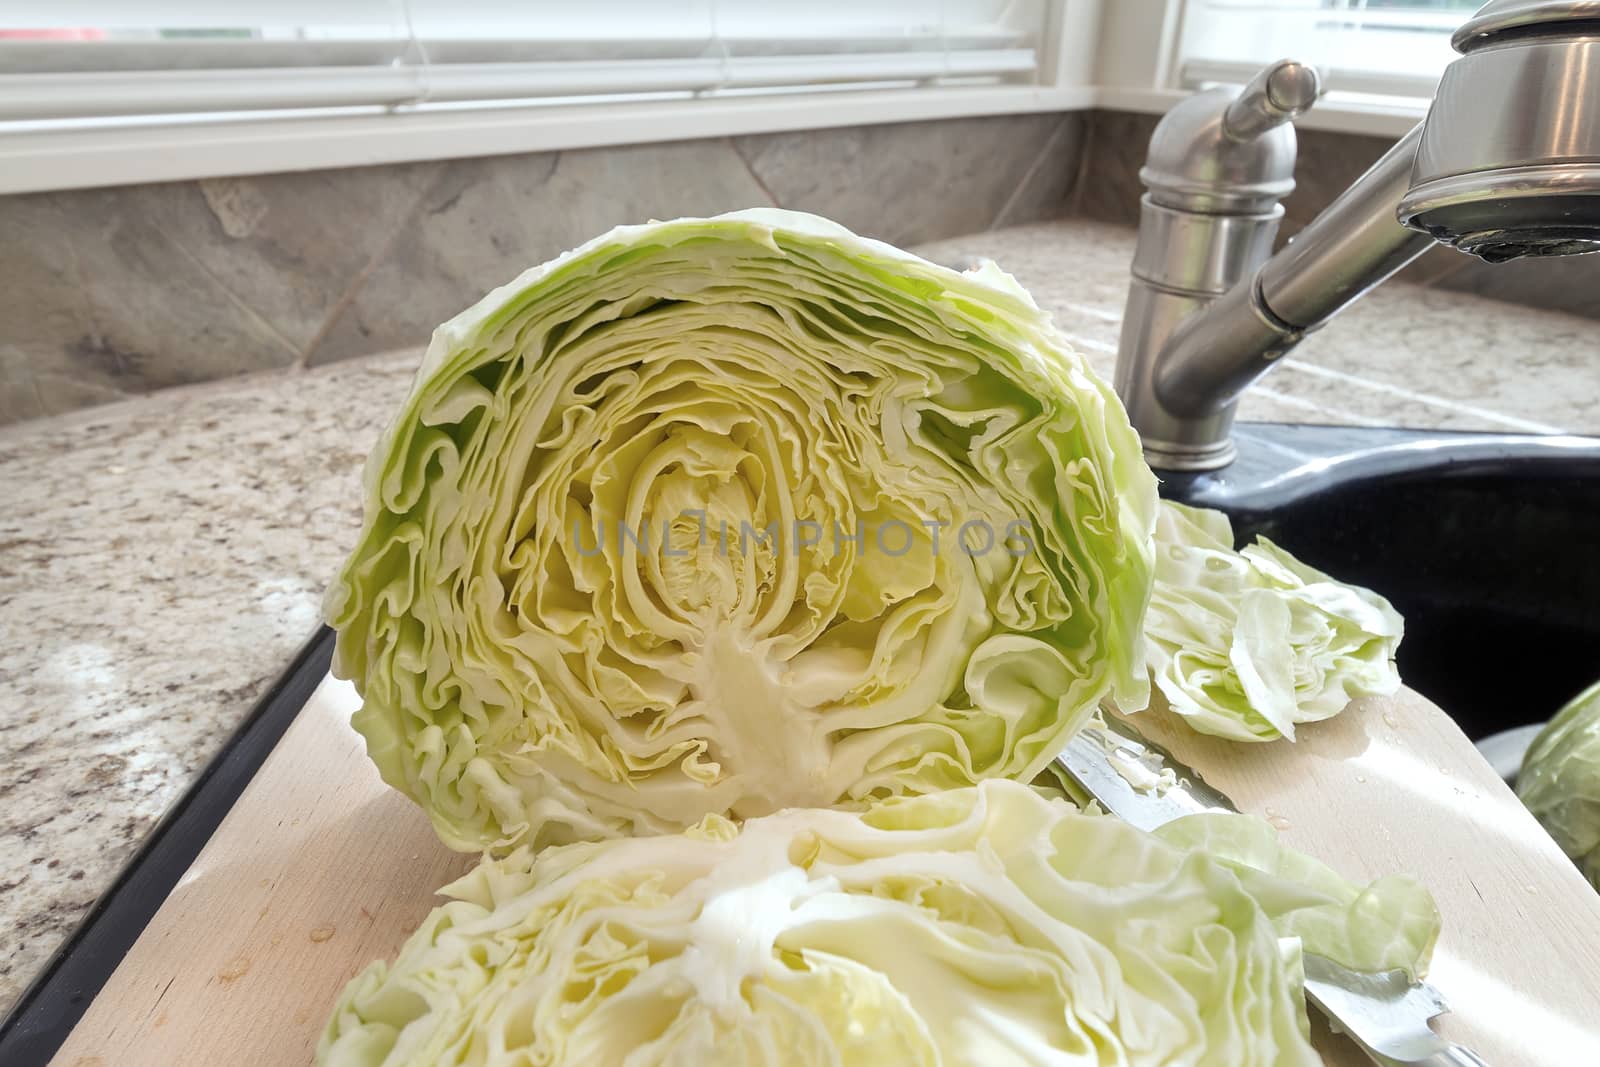 Cross Section of Headed Cabbage Closeup by jpldesigns